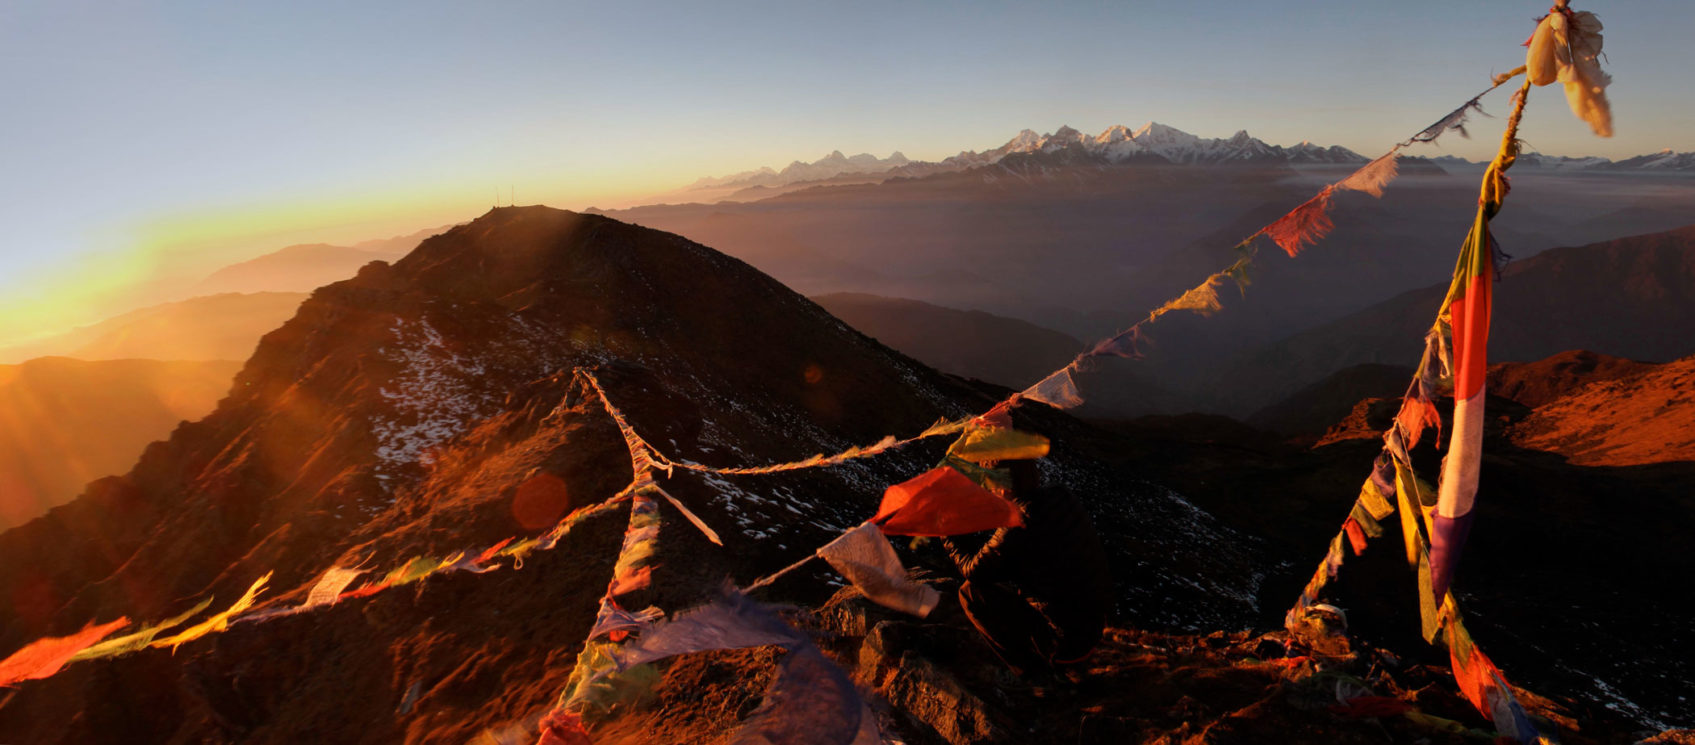 Tibetan flags on a mountain during sunset